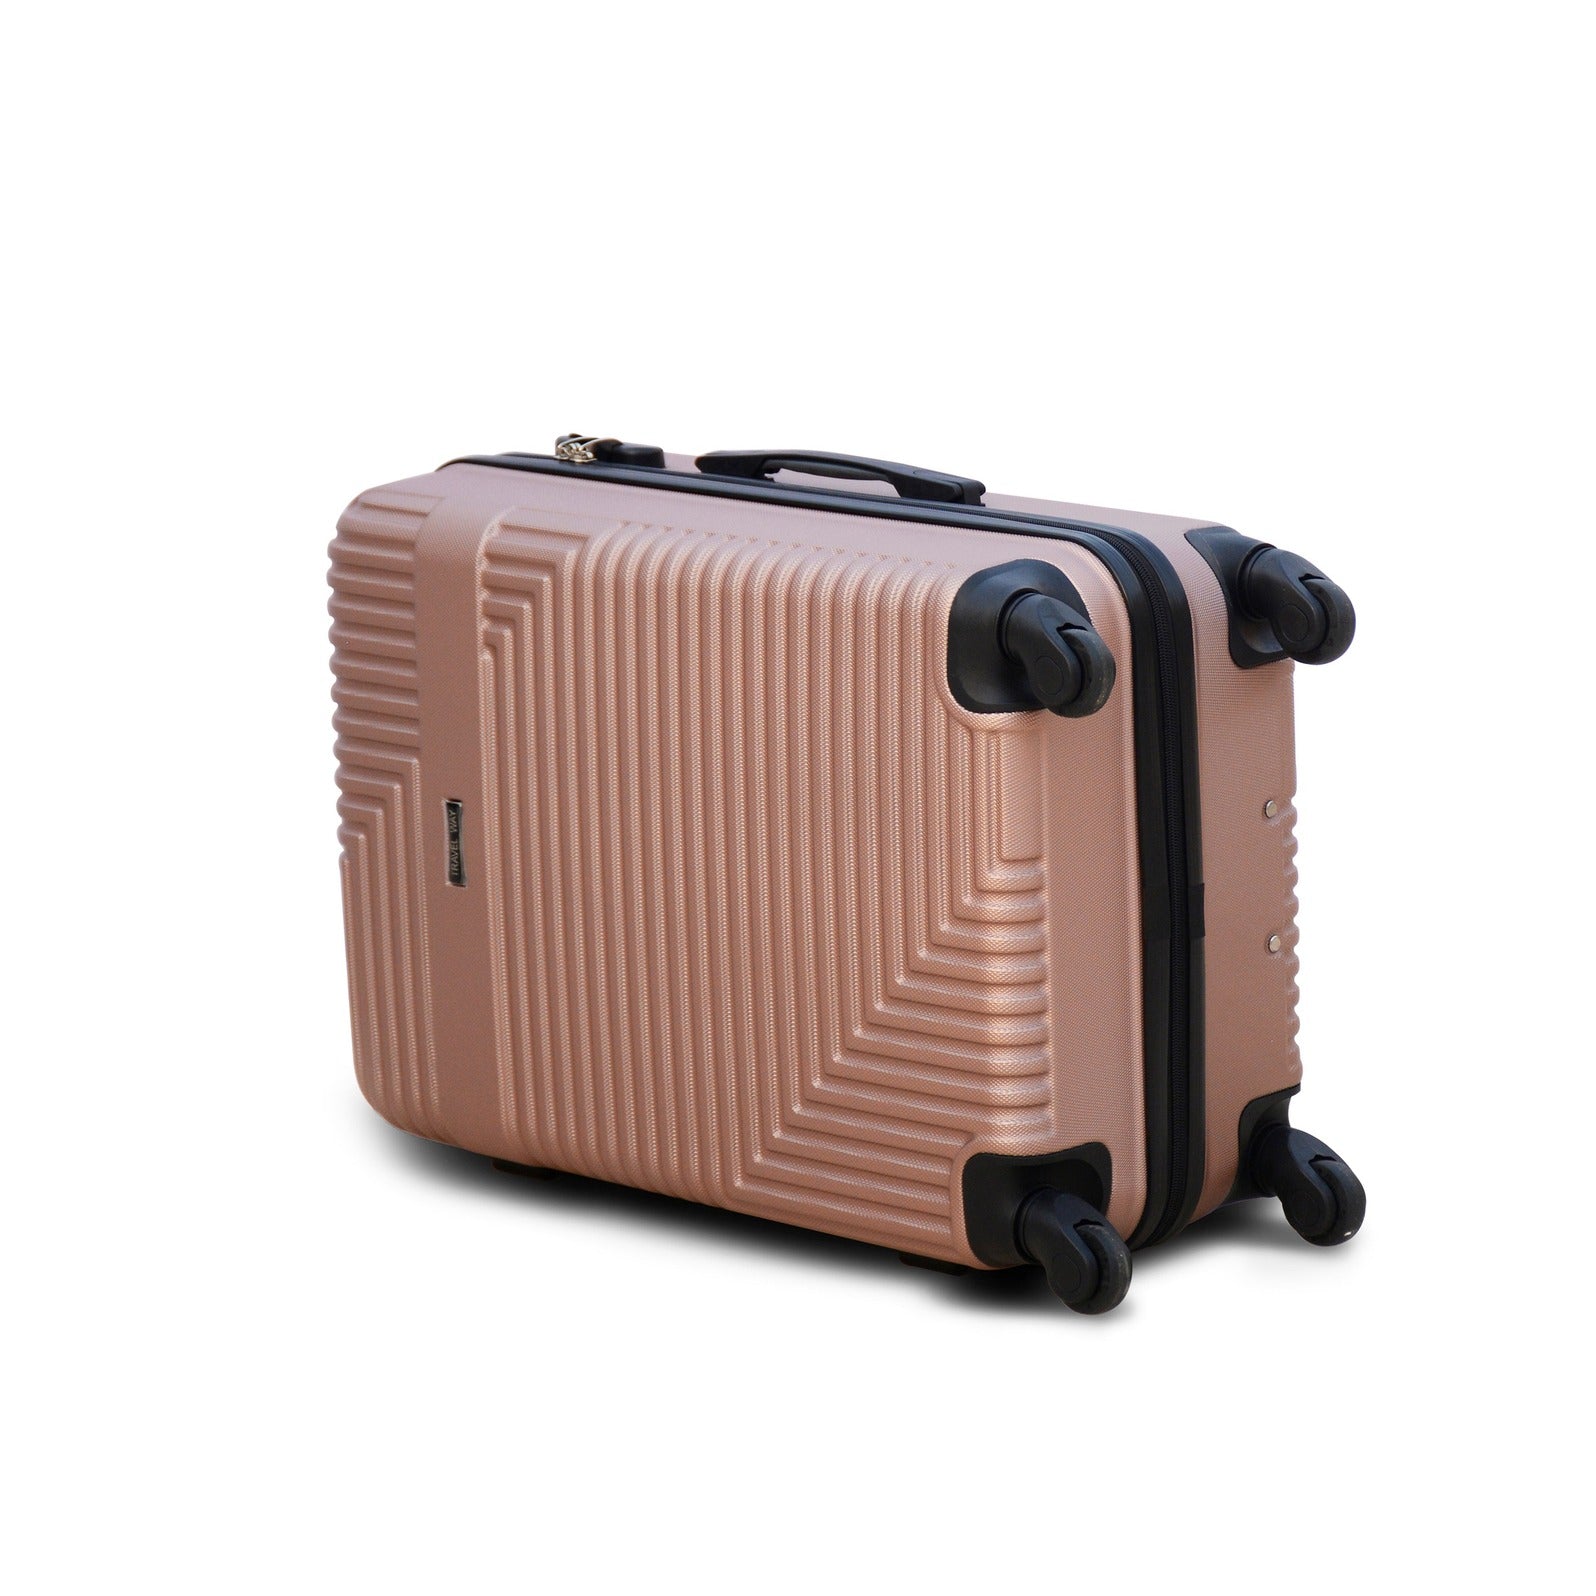 28" Rose Gold Colour Travel Way ABS Luggage Lightweight Hard Case Trolley Bag